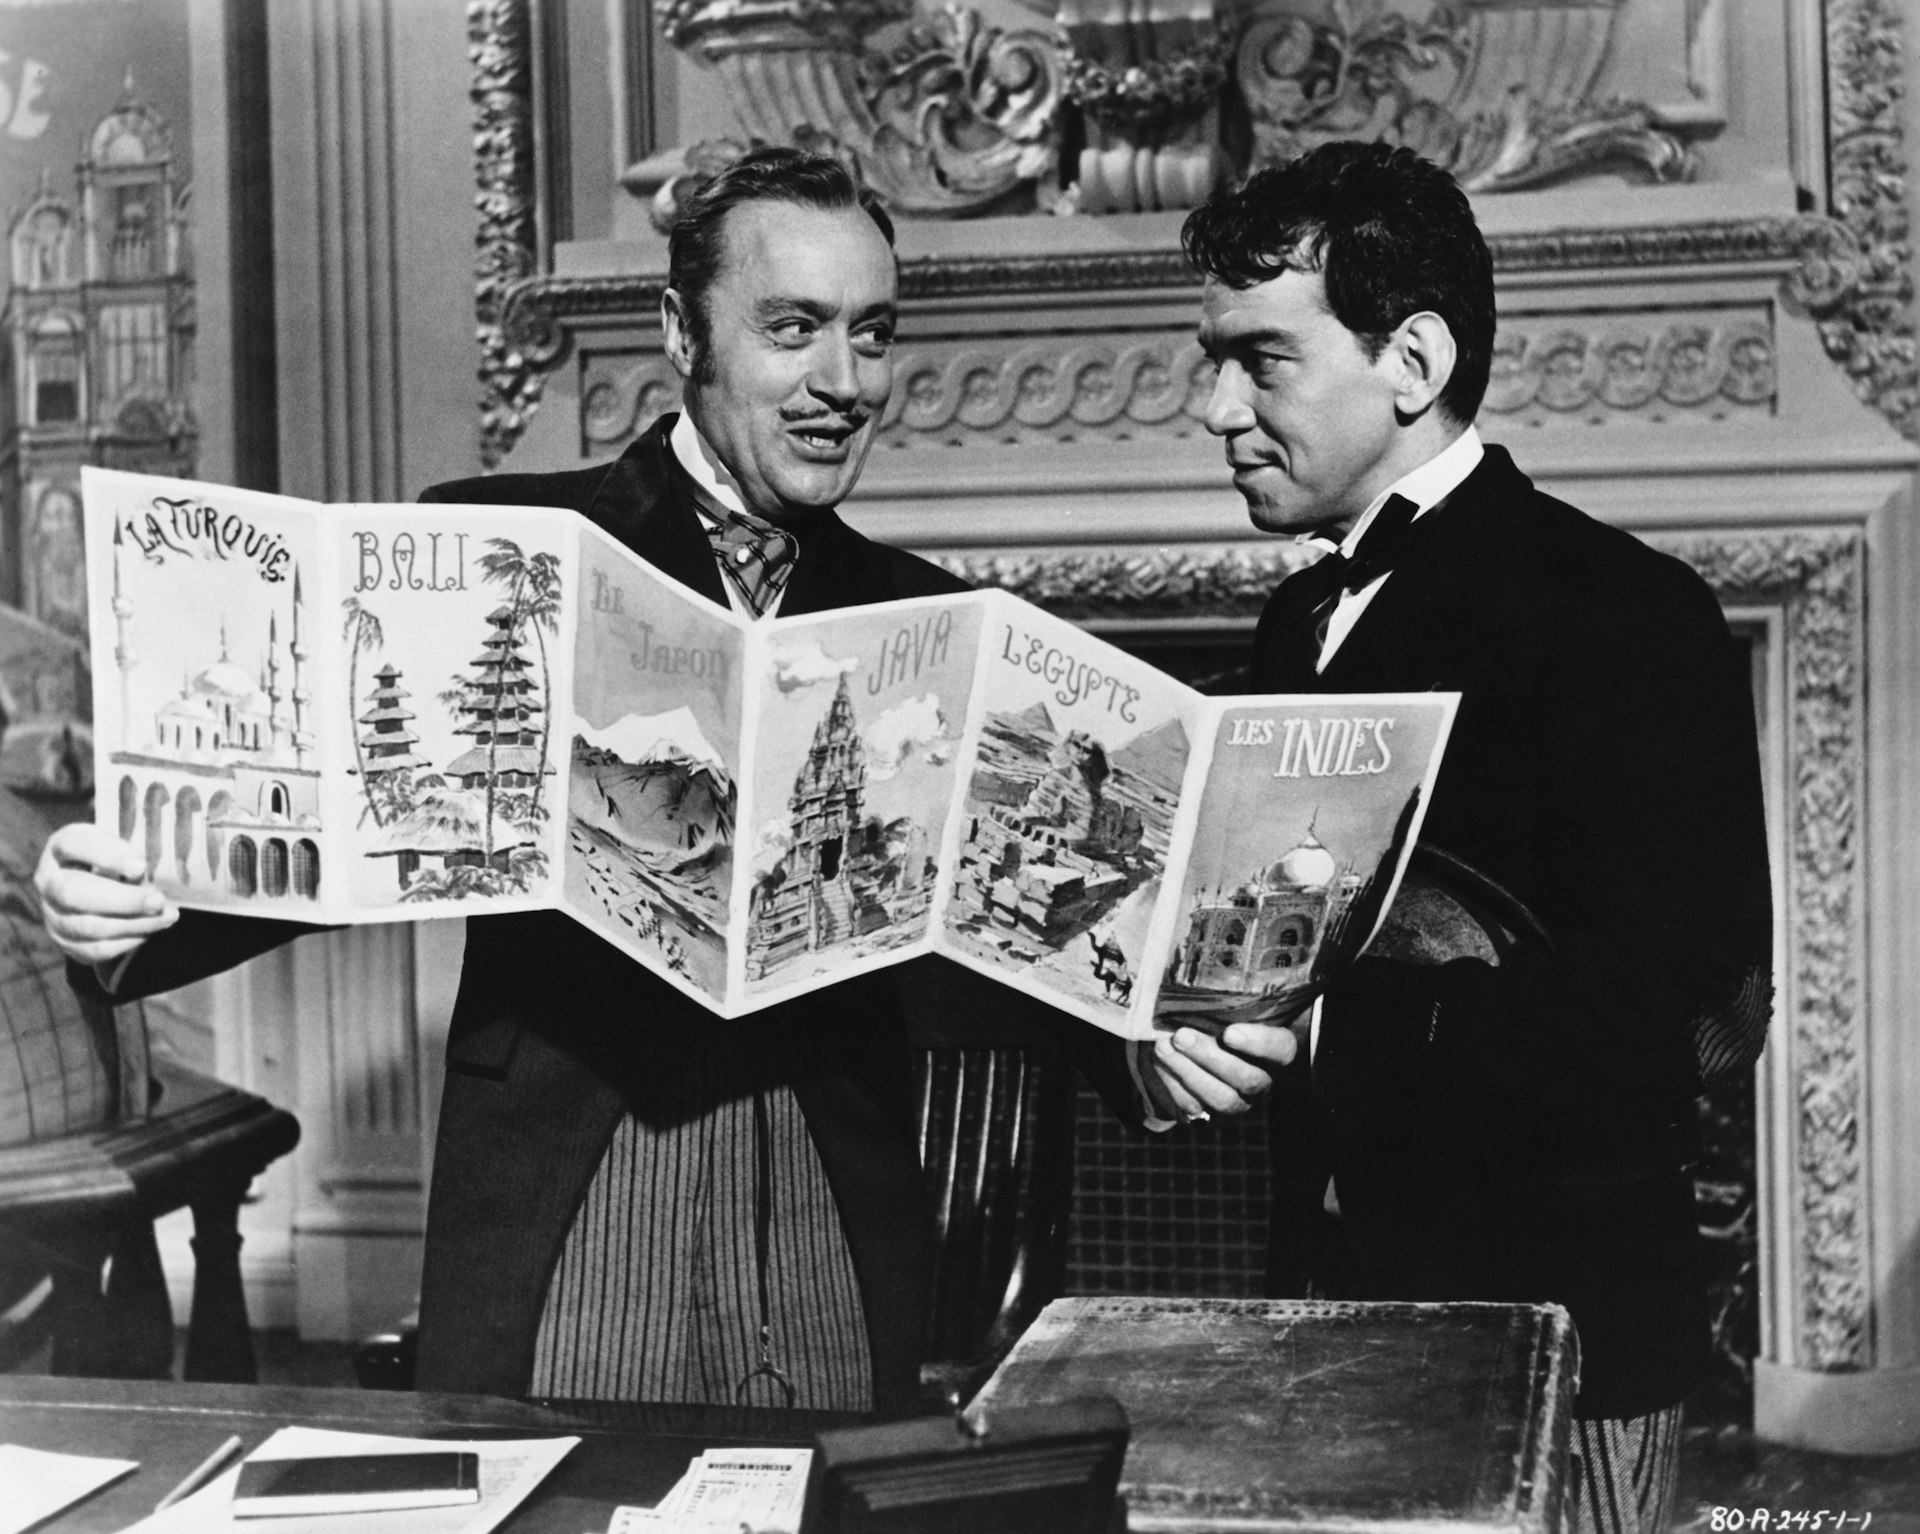 A black and white still from the 1956 film version of Around the World in 80 Days. Monsieur Gasse and Passepartout are two gentleman in black coats and ties with slick hair and are holding a brochure advertising destinations like La Turouis, Bali, Japan, Java, Egypt, and India.